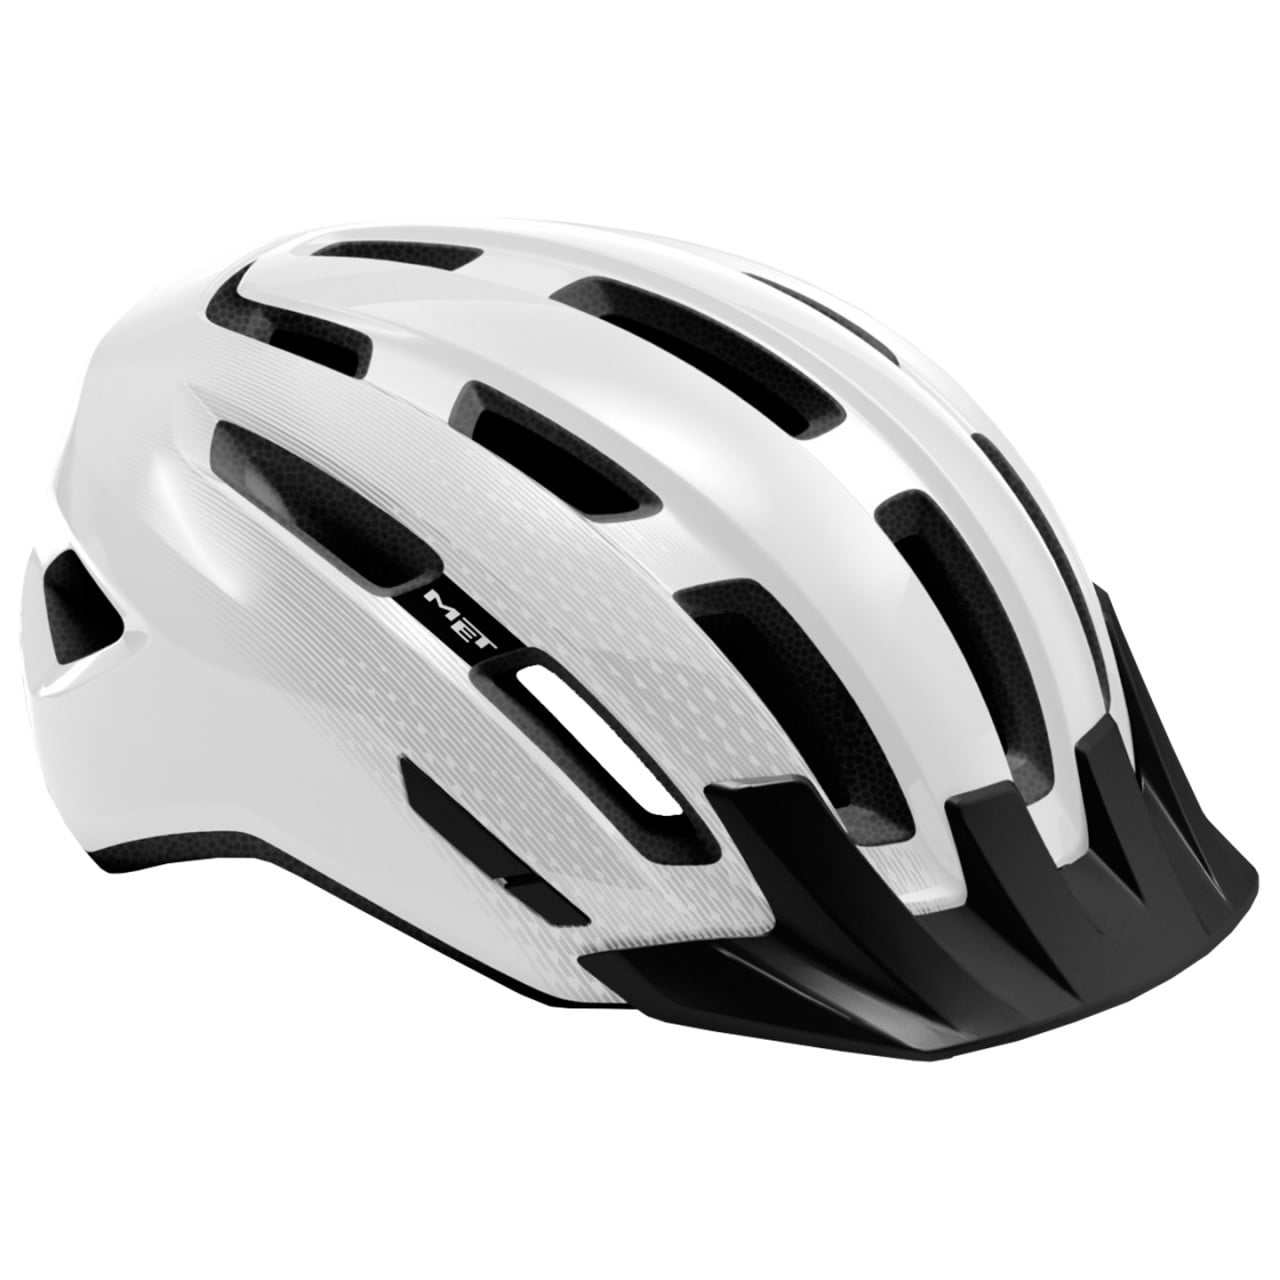 Kask rowerowy Downtown Mips